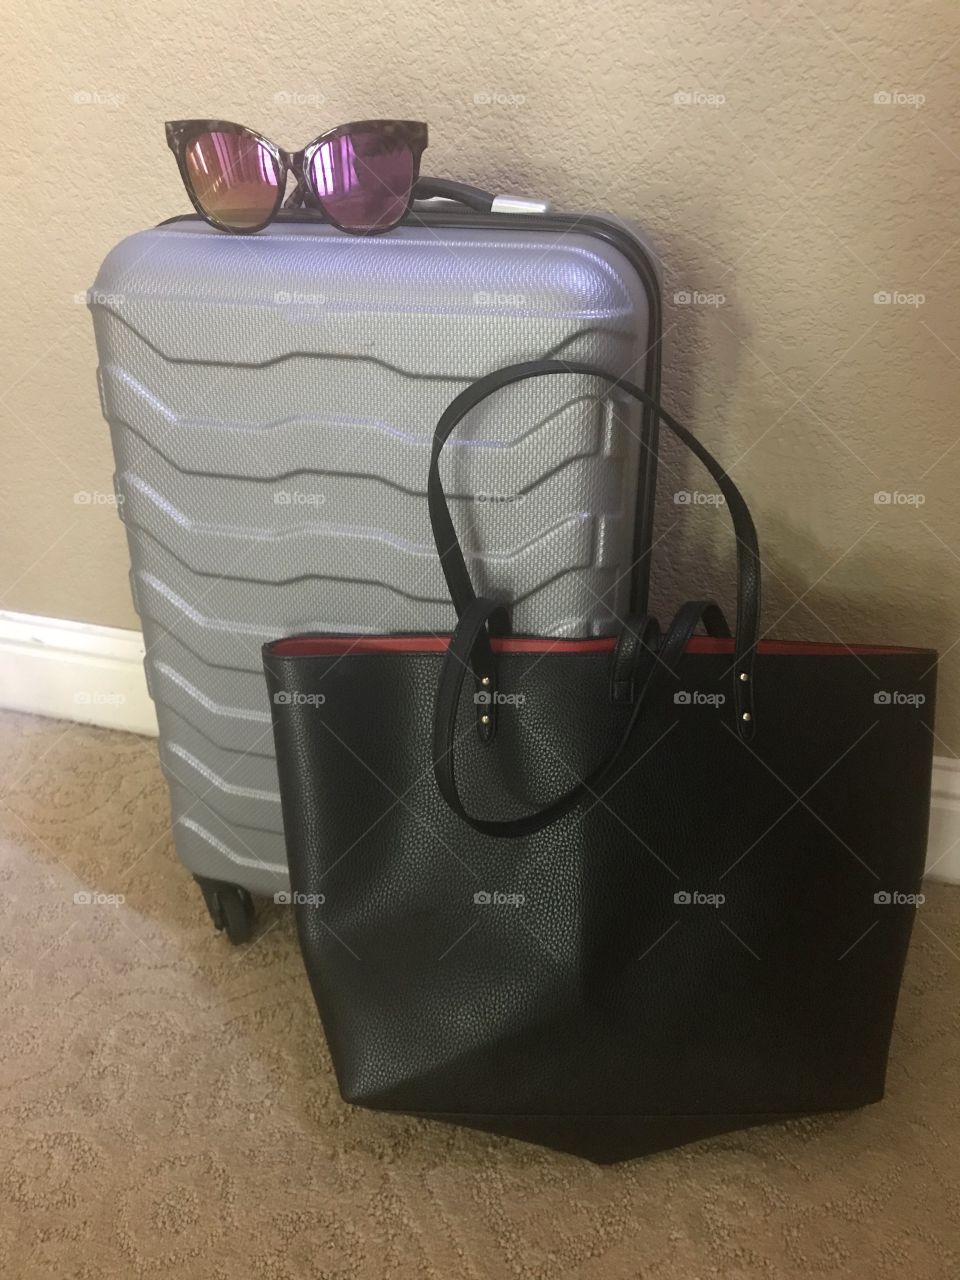 Luggage - bags are packed for vacation with silver suitcase, purse and sunglasses on top . 